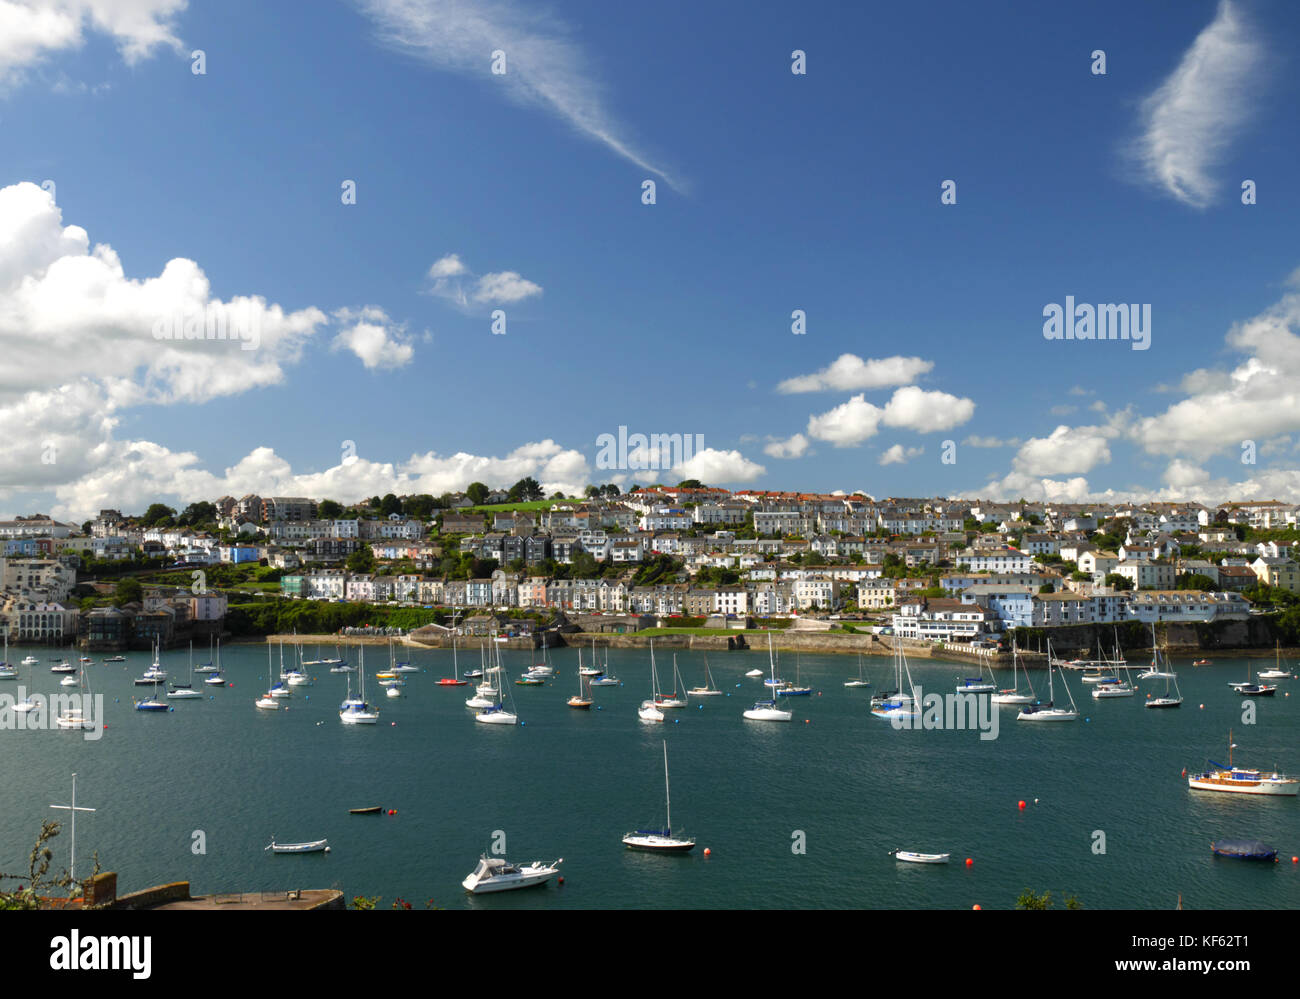 View of Falmouth, Cornwall, from the village of Flushing across the River Fal. Stock Photo